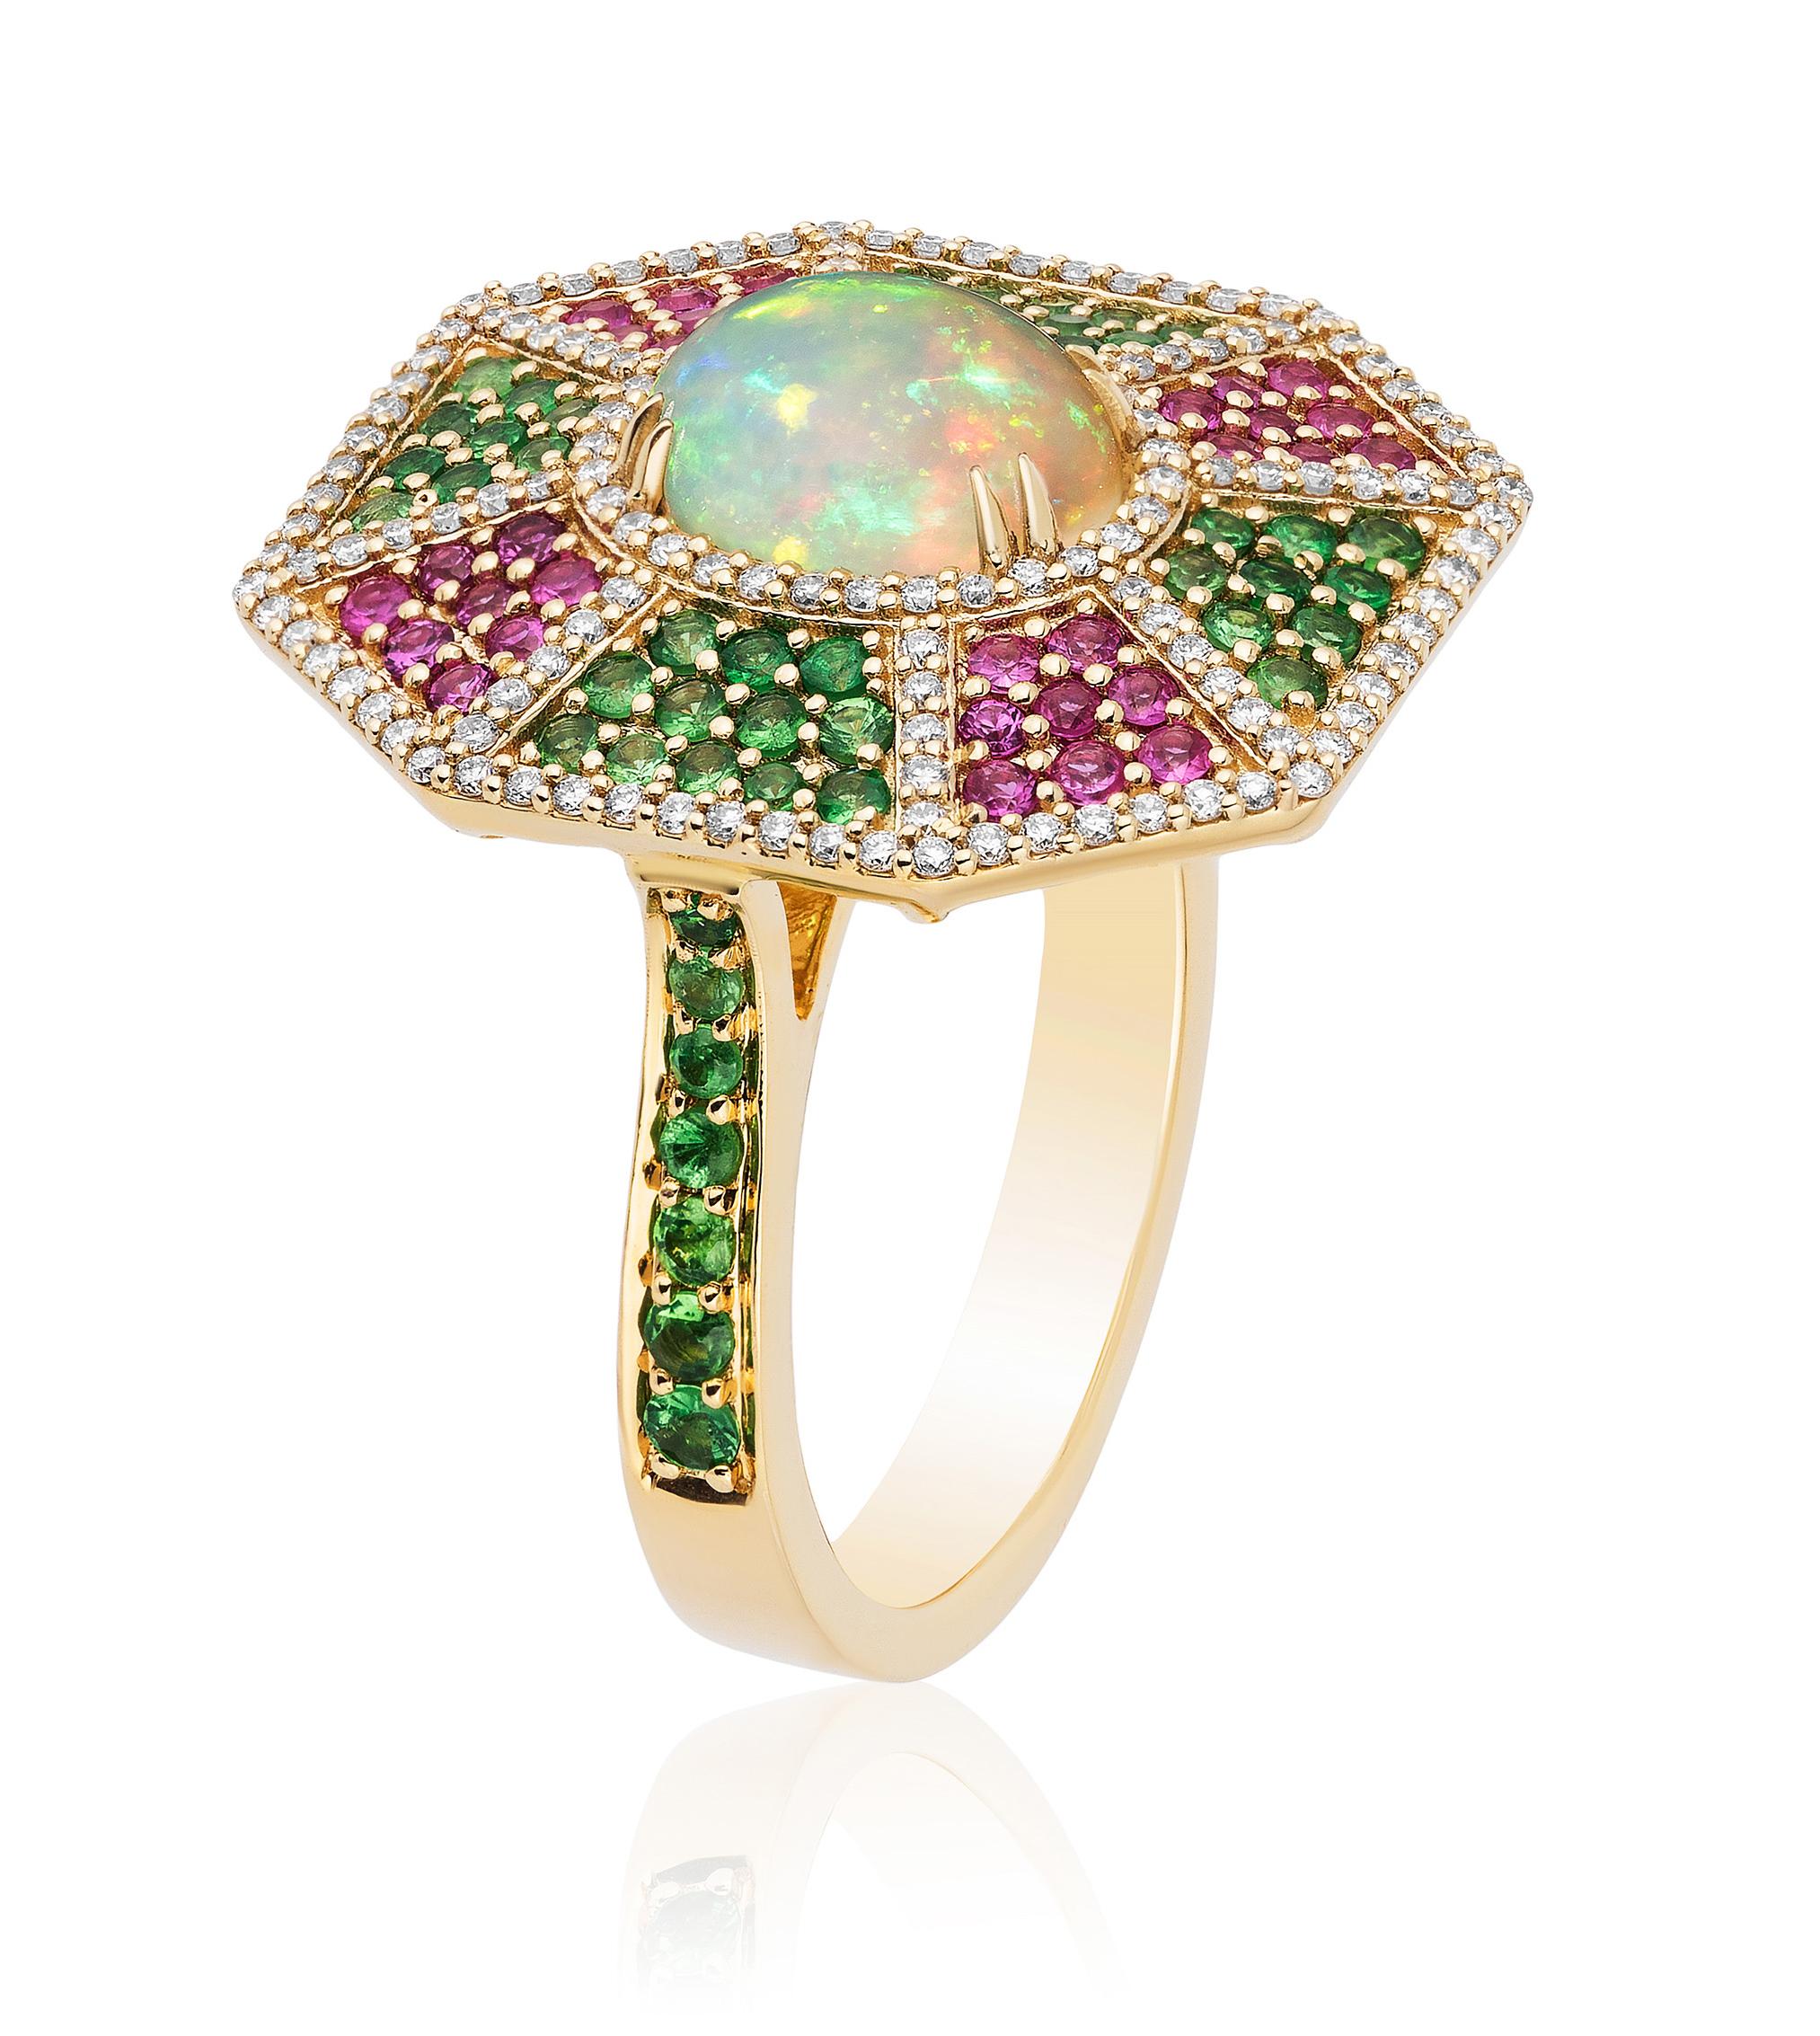 Opal, Tsavorite, Pink Sapphire Hexagon Ring with Diamond in 18k Yellow Gold, from 'G-One' Collection

Stone size: 9 x 7 mm

Gemstone Weight : Opal - 1.18 Carats. 
                                 Pink Sapphire - 0.35 Carats . 
                      